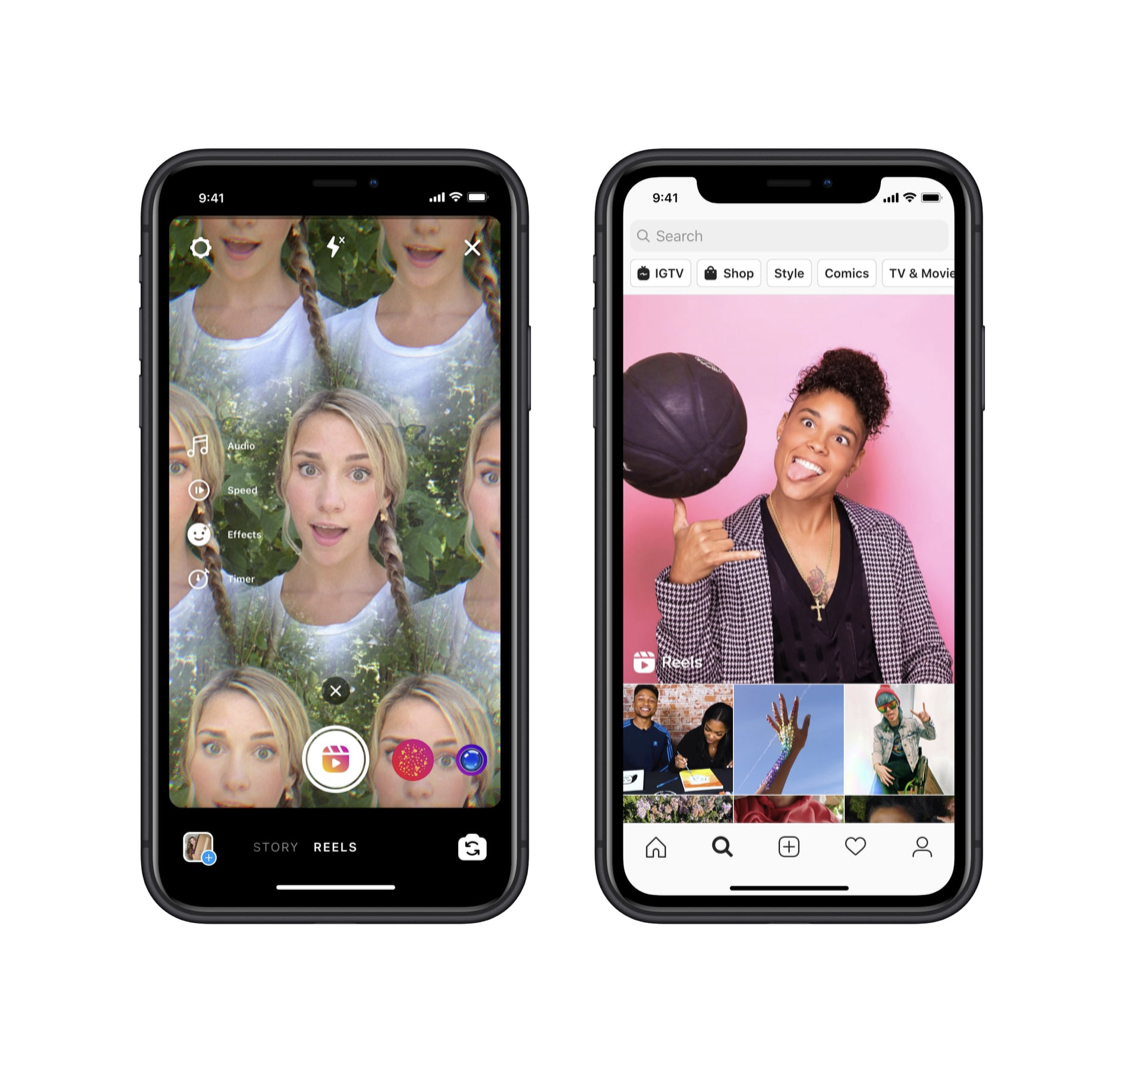 Instagram introduces 'Reels' to its users amid talk of a possible TikTok ban in the US 35